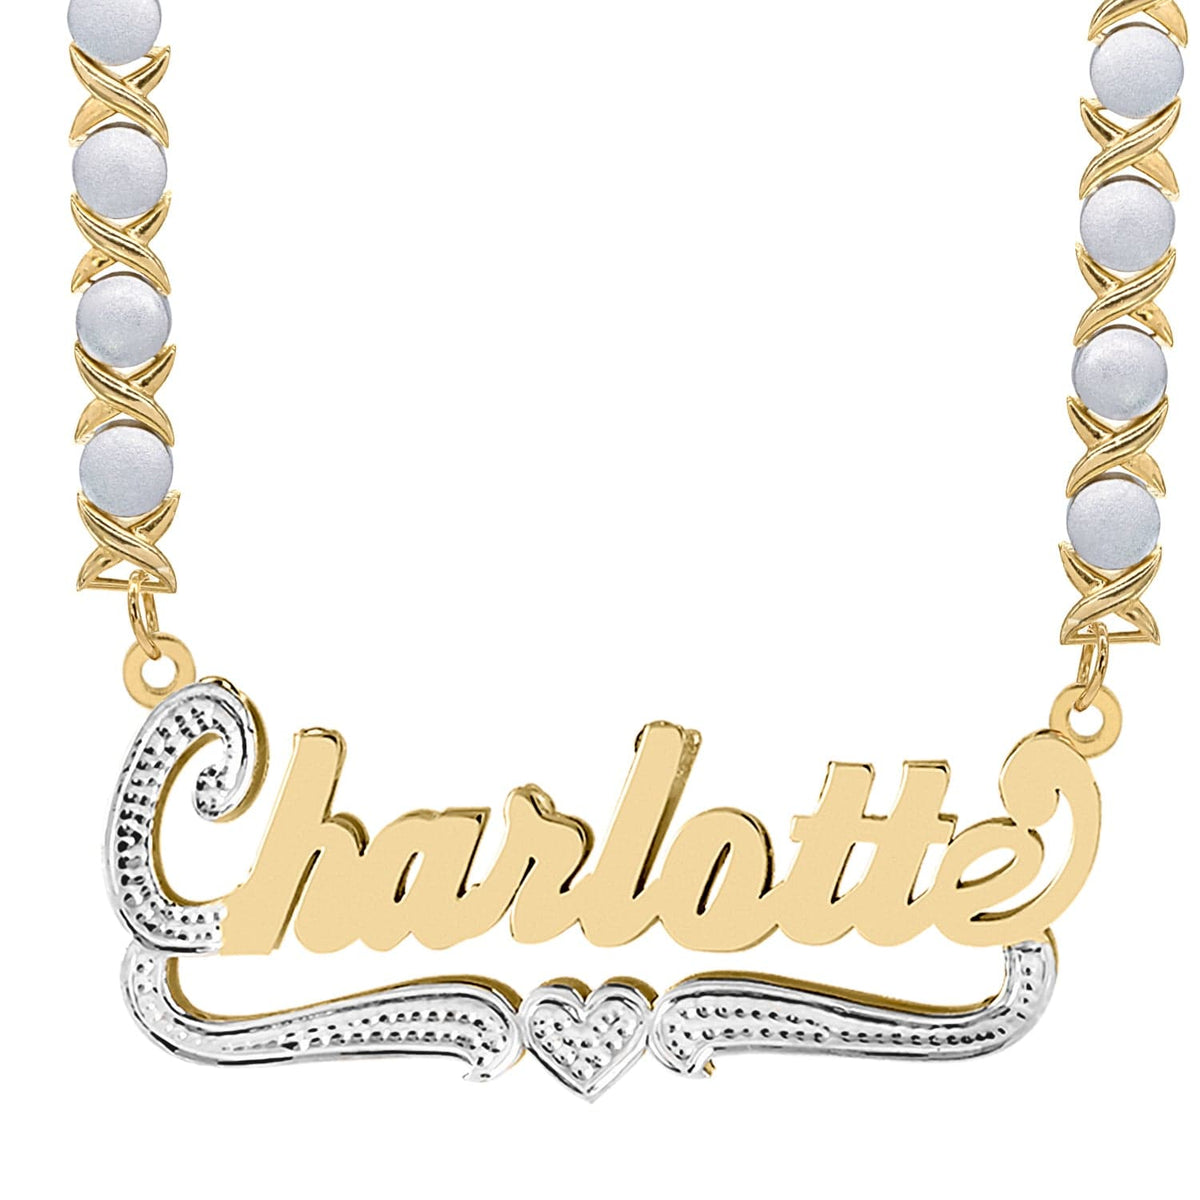 14k Gold over Sterling Silver / Rhodium Xoxo Chain Double Script Name Plate With Beading with Rhodium Xoxo Chain